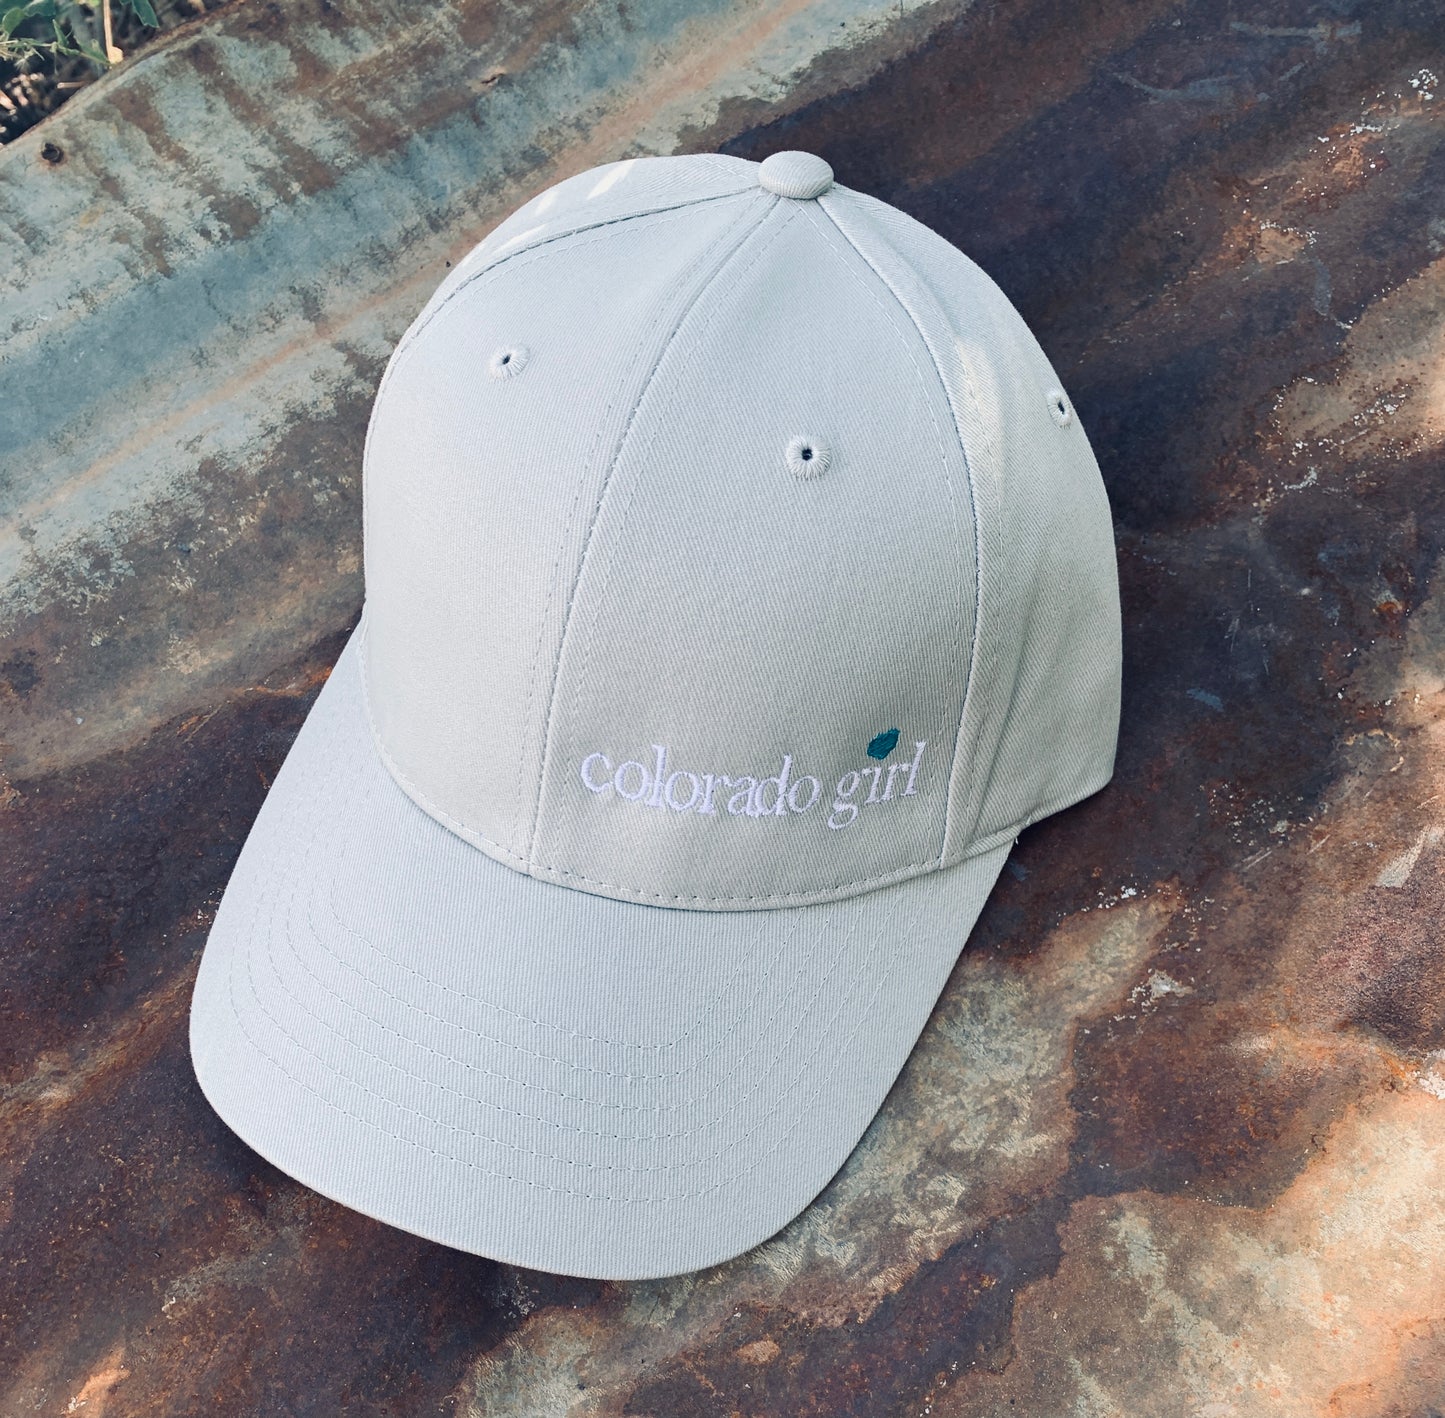 Embroidered Colorado Girl Trucker Hat